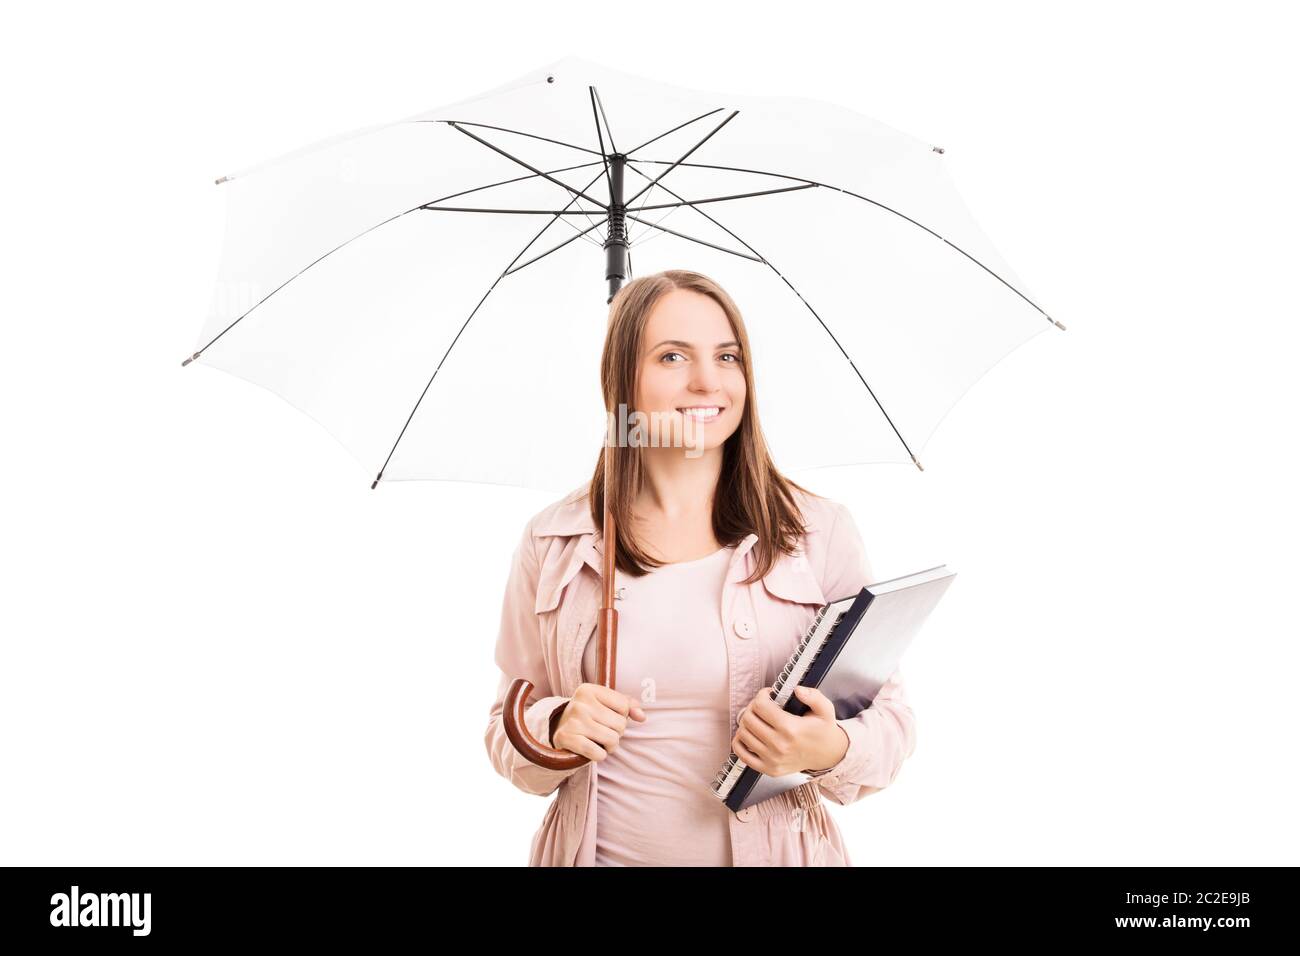 Young girl under an umbrella holding some books, isolated on white background. Stock Photo